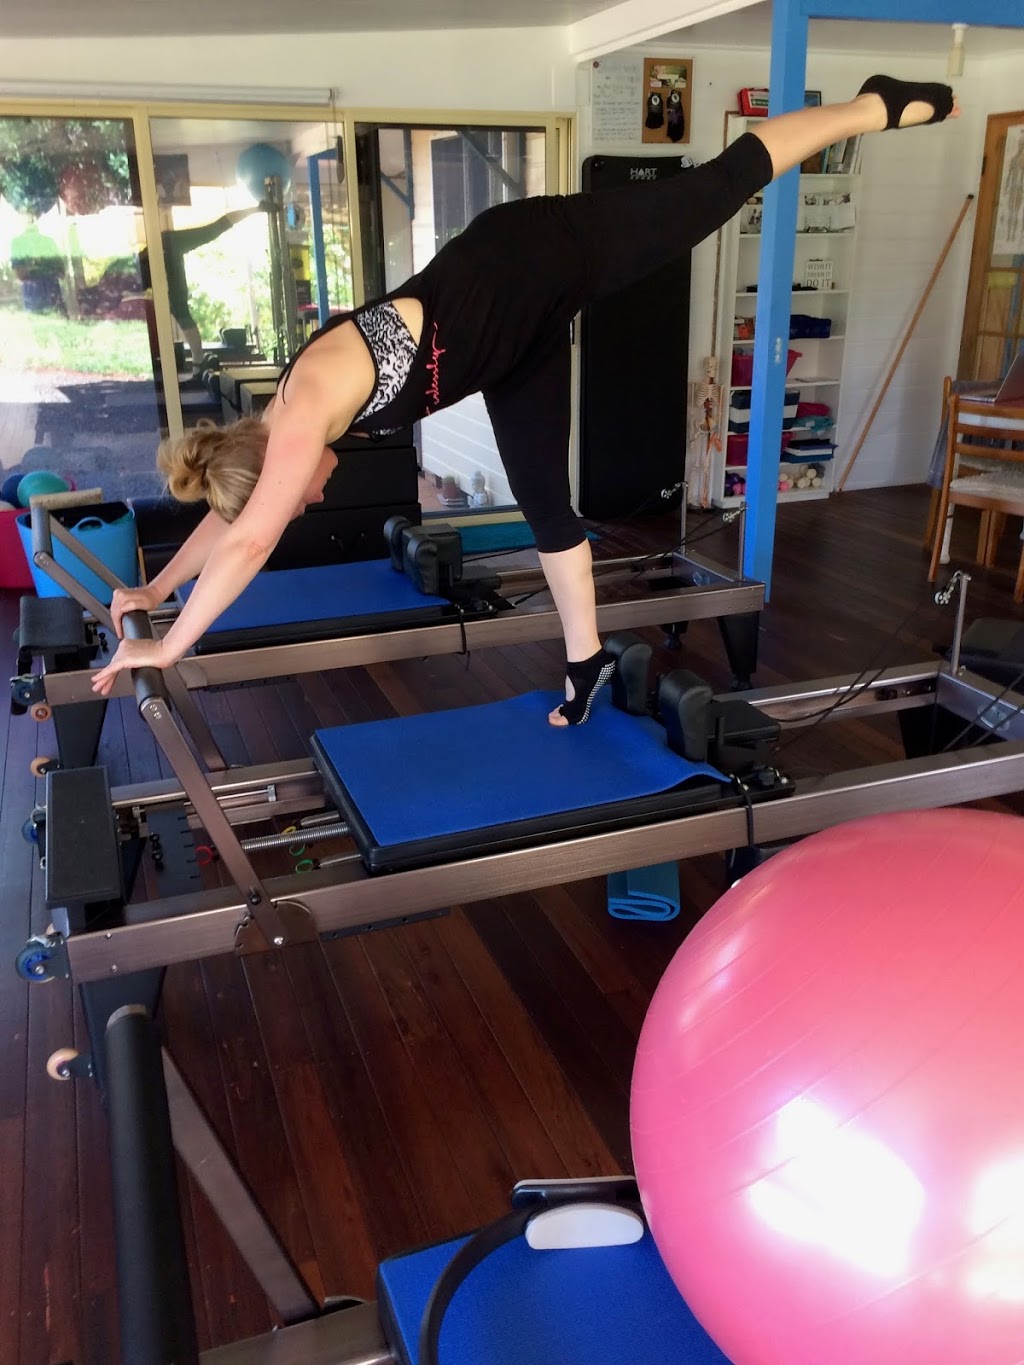 Energy Pilates Studio and Bowen Therapy | gym | 31 Roth Ln, Ninderry QLD 4561, Australia | 0403325785 OR +61 403 325 785